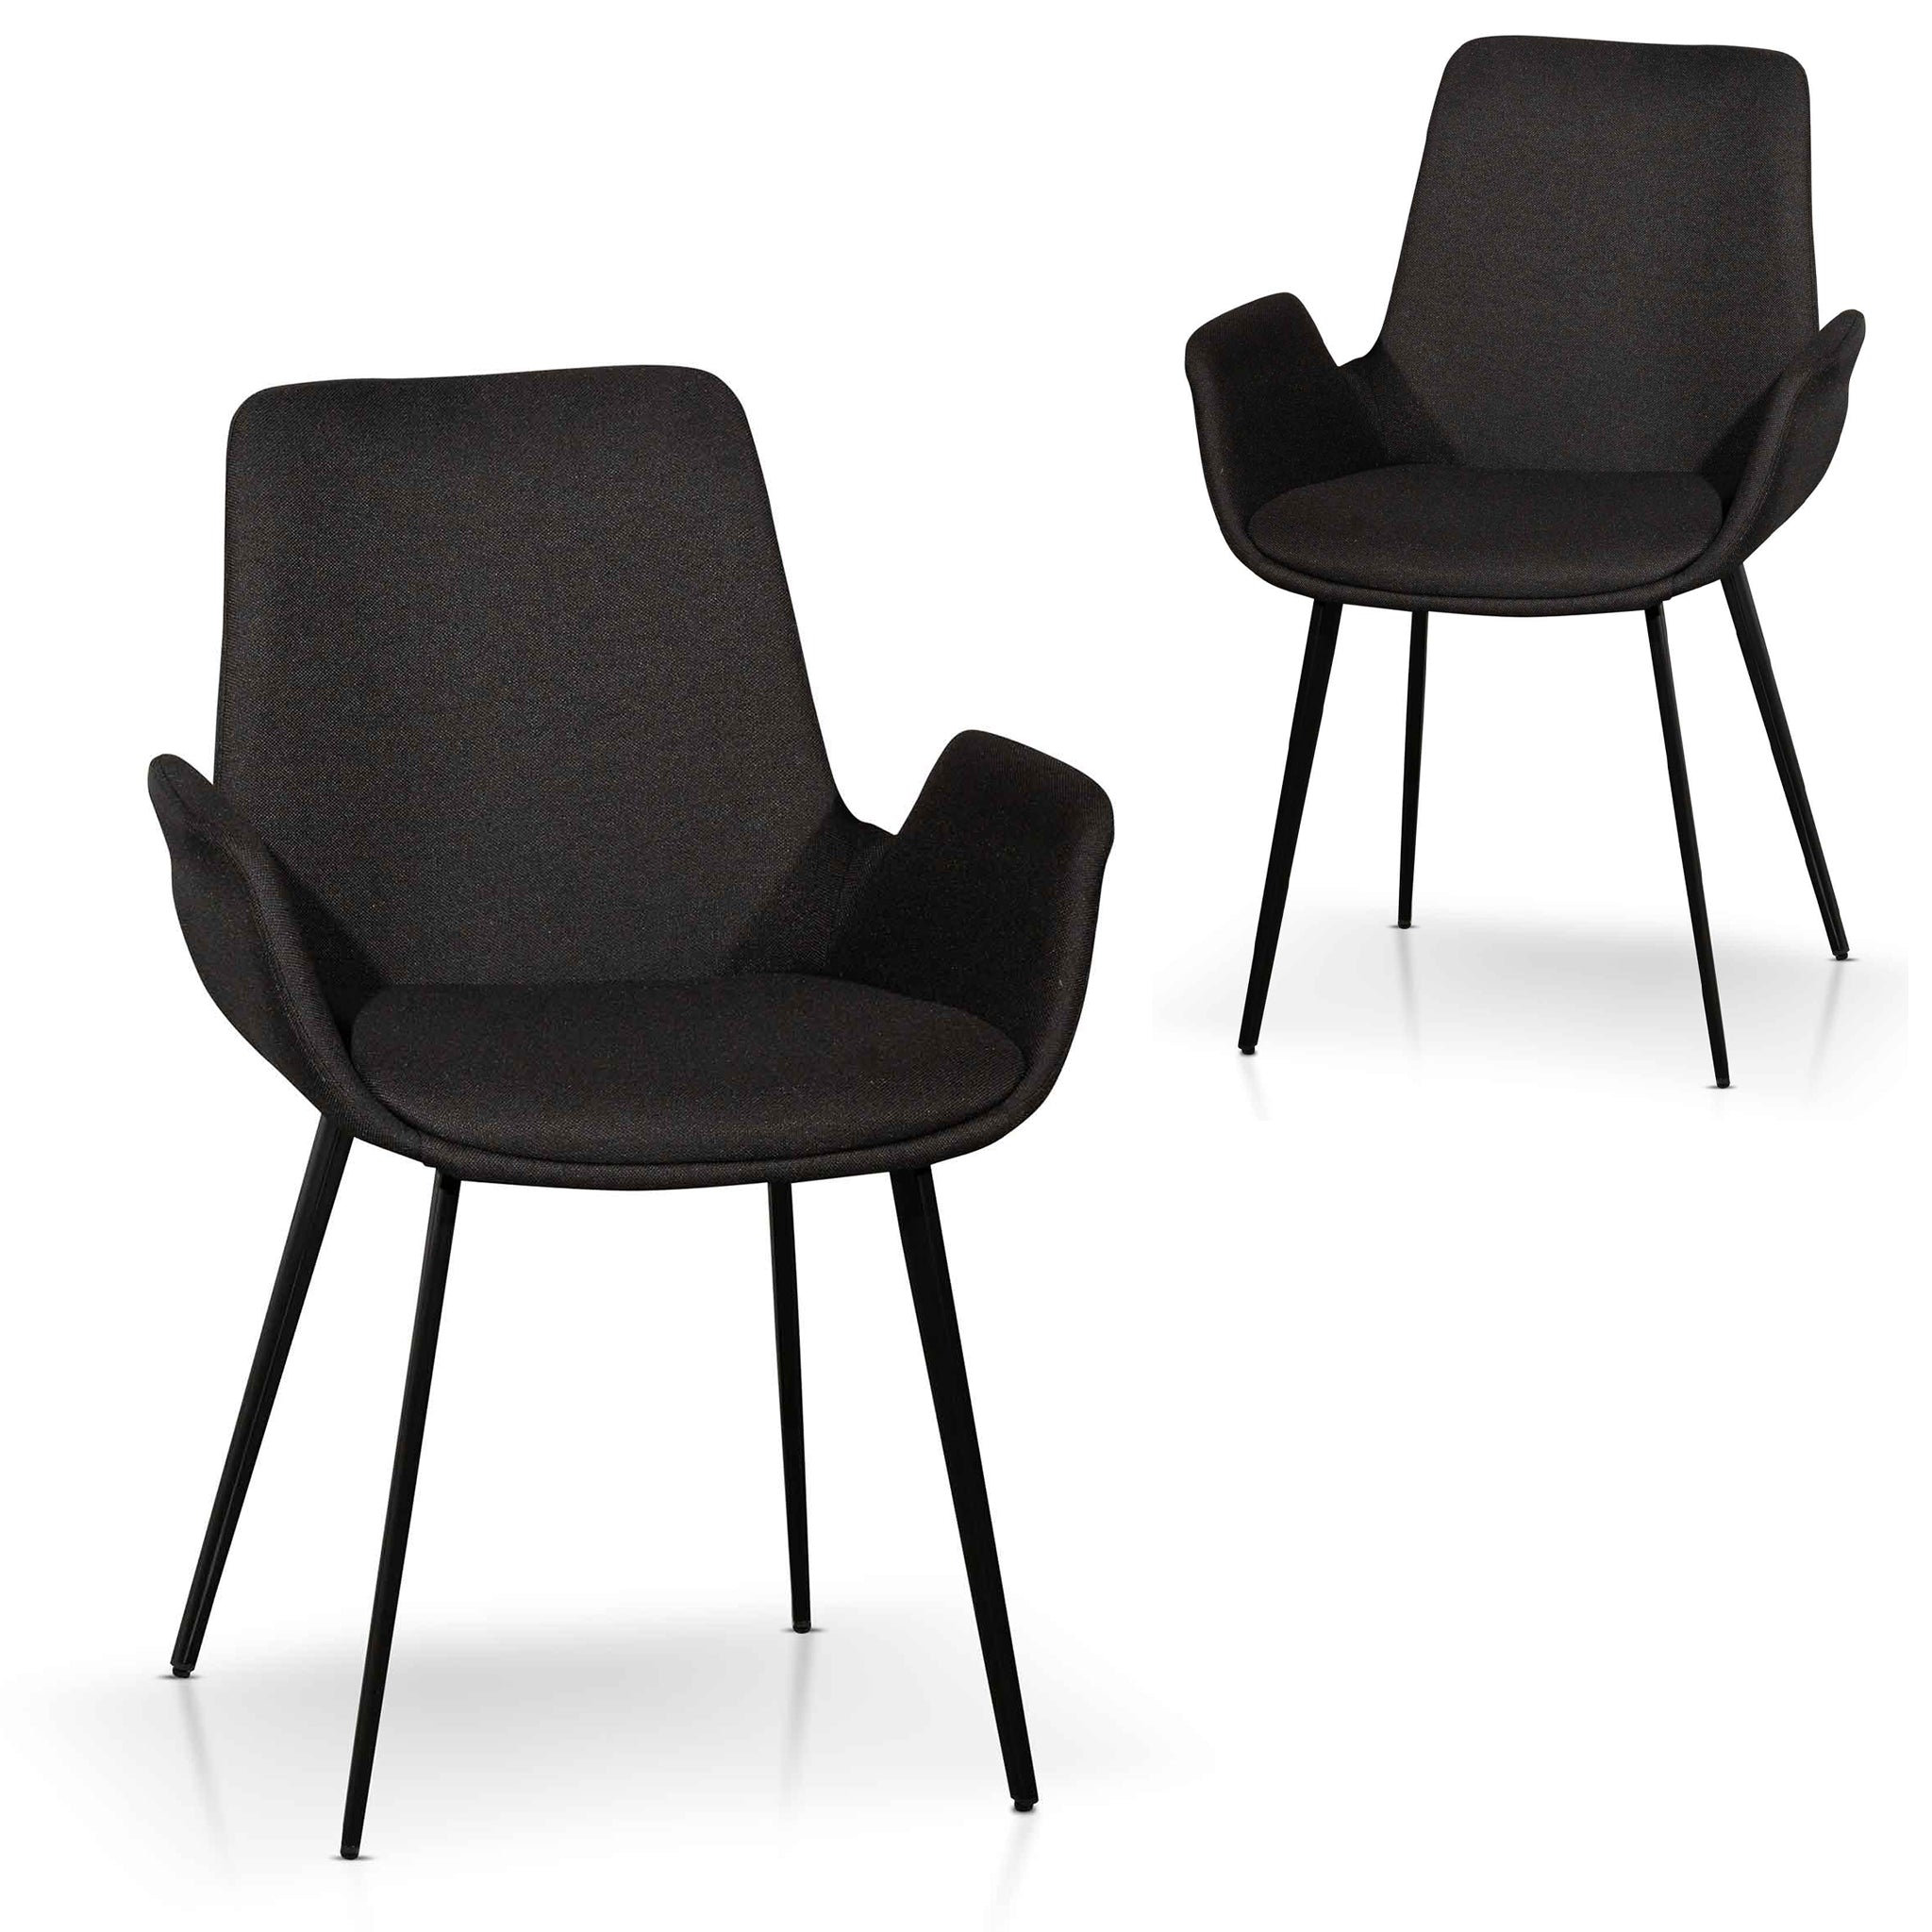 Set of 2 Amelia Fabric Dining Chair - Black - Dining Chairs